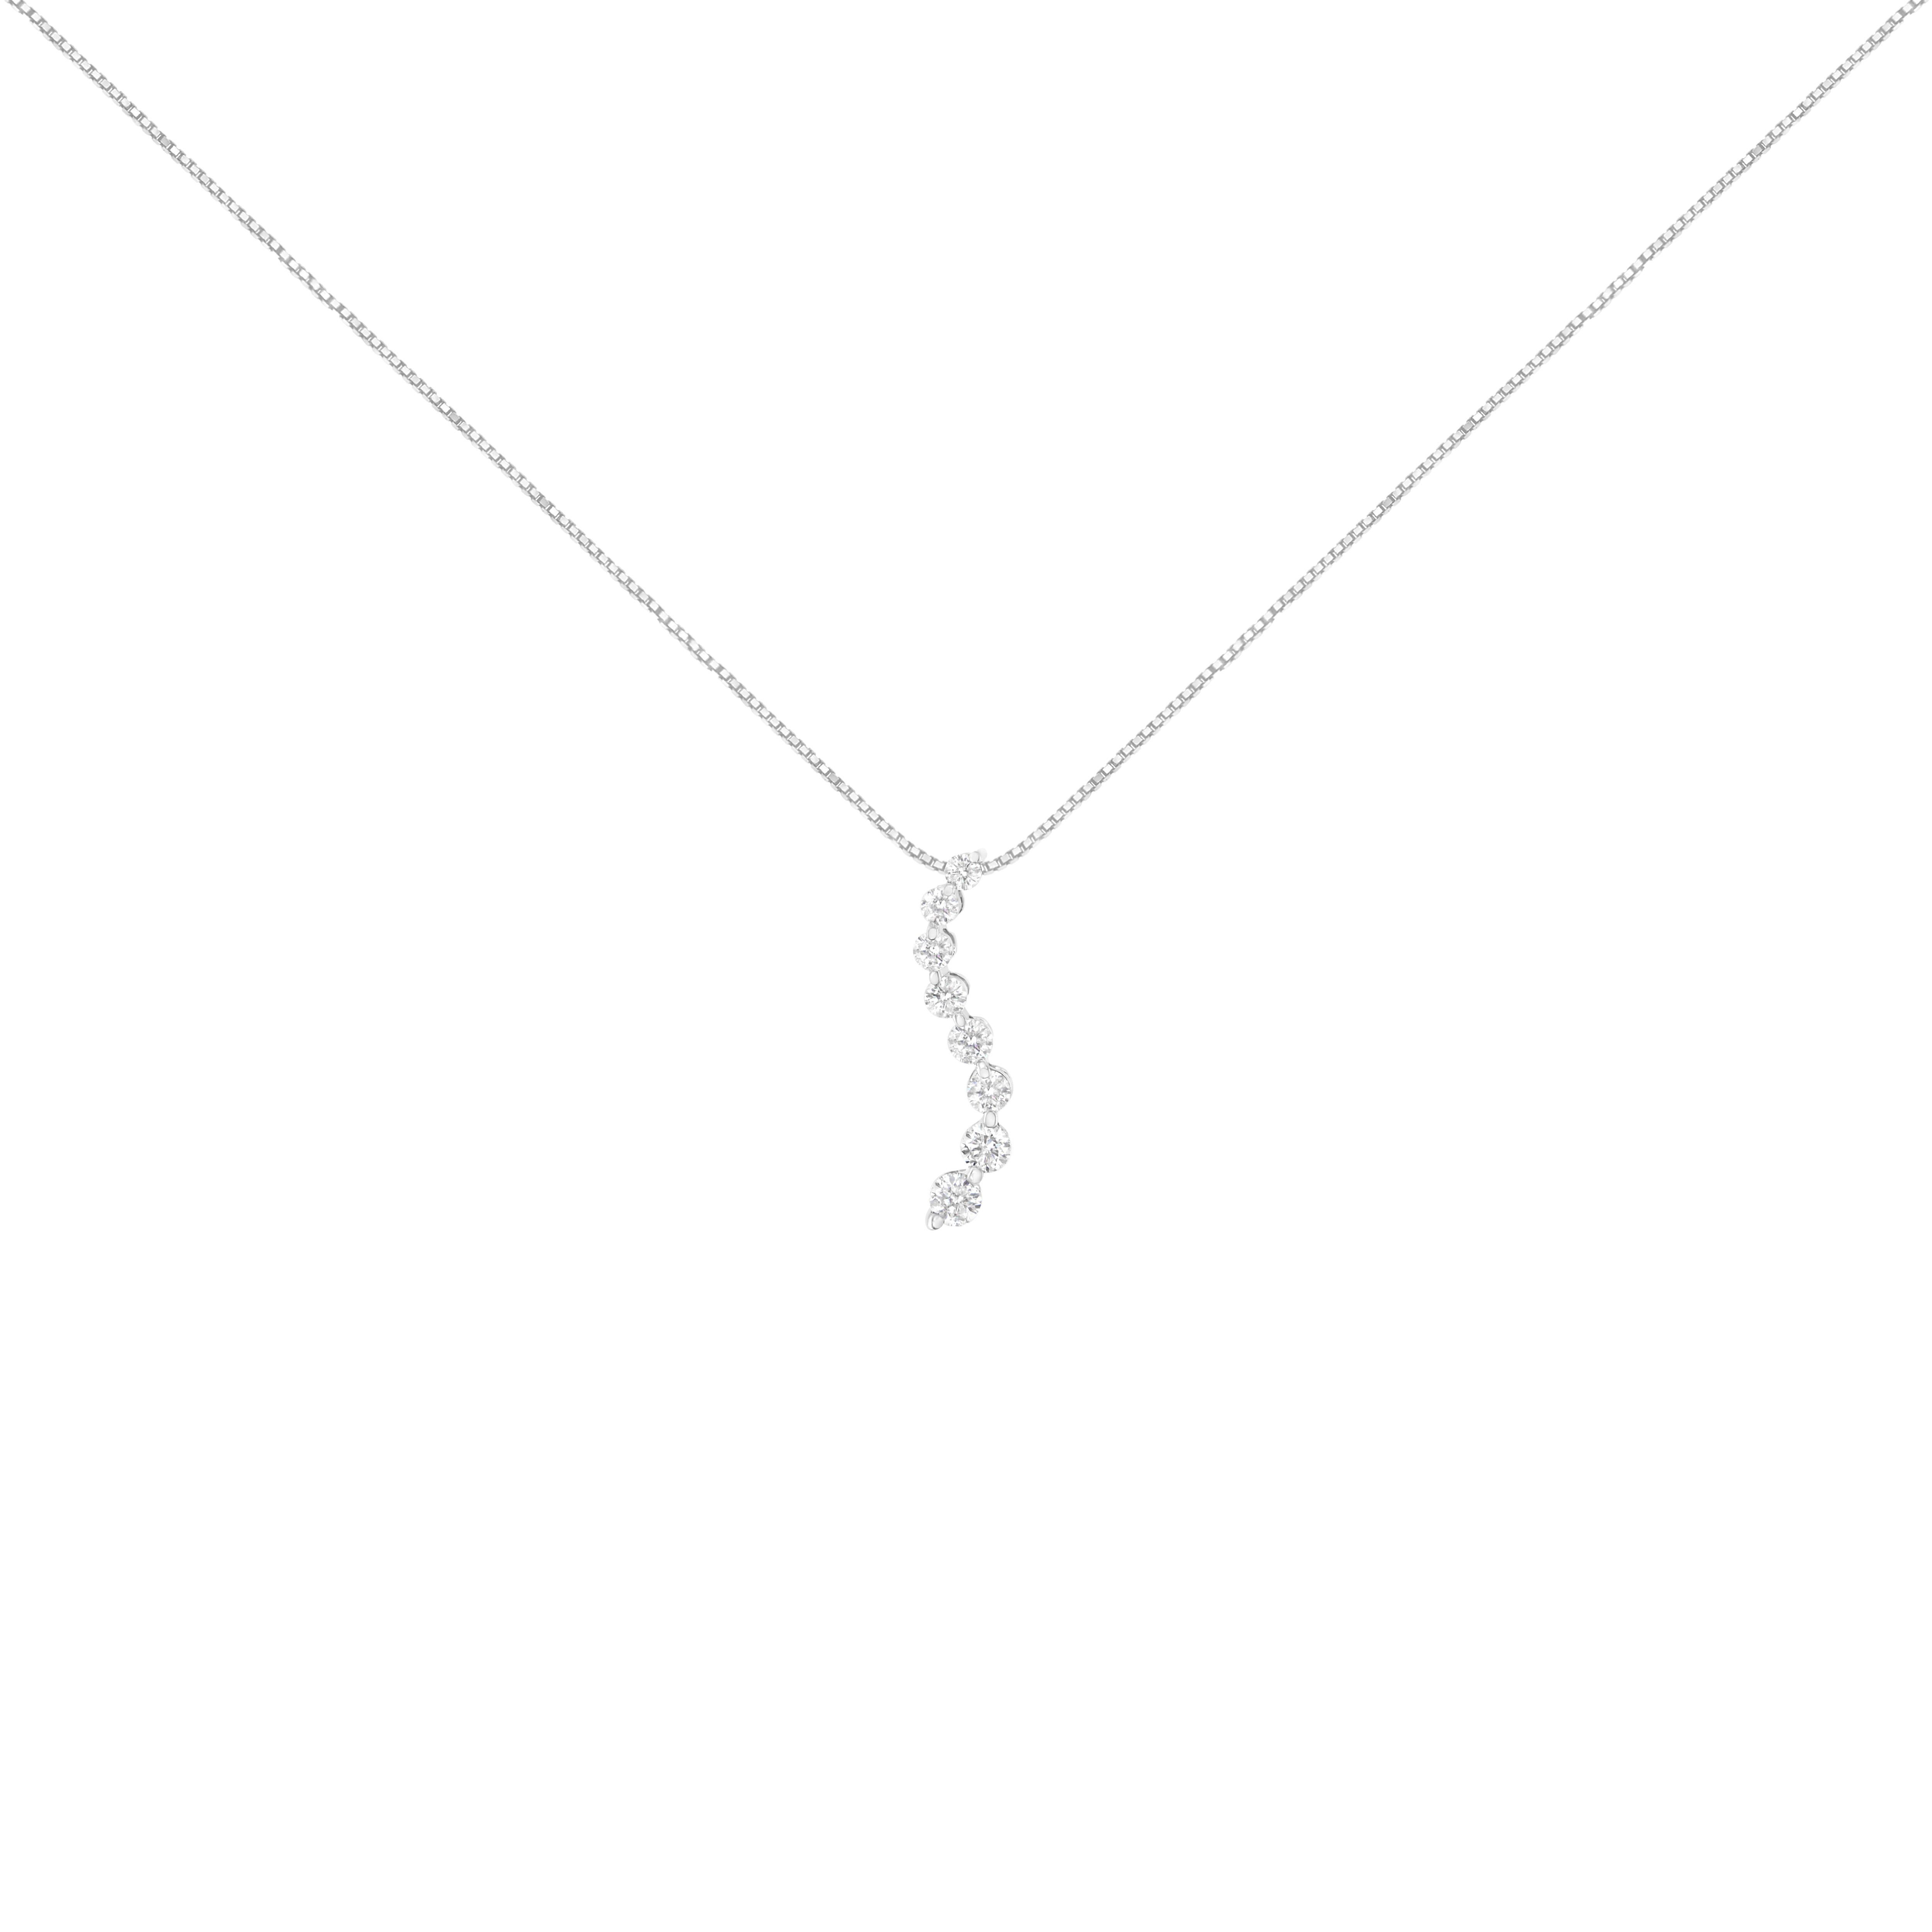 Fetch the attention of everyone at next party by wearing this dazzling neckpiece. This 14-karats white gold pendant is highly polished to shine for a bright radiance. It features a gentle wavy design, adorned with round cut diamonds on the front and